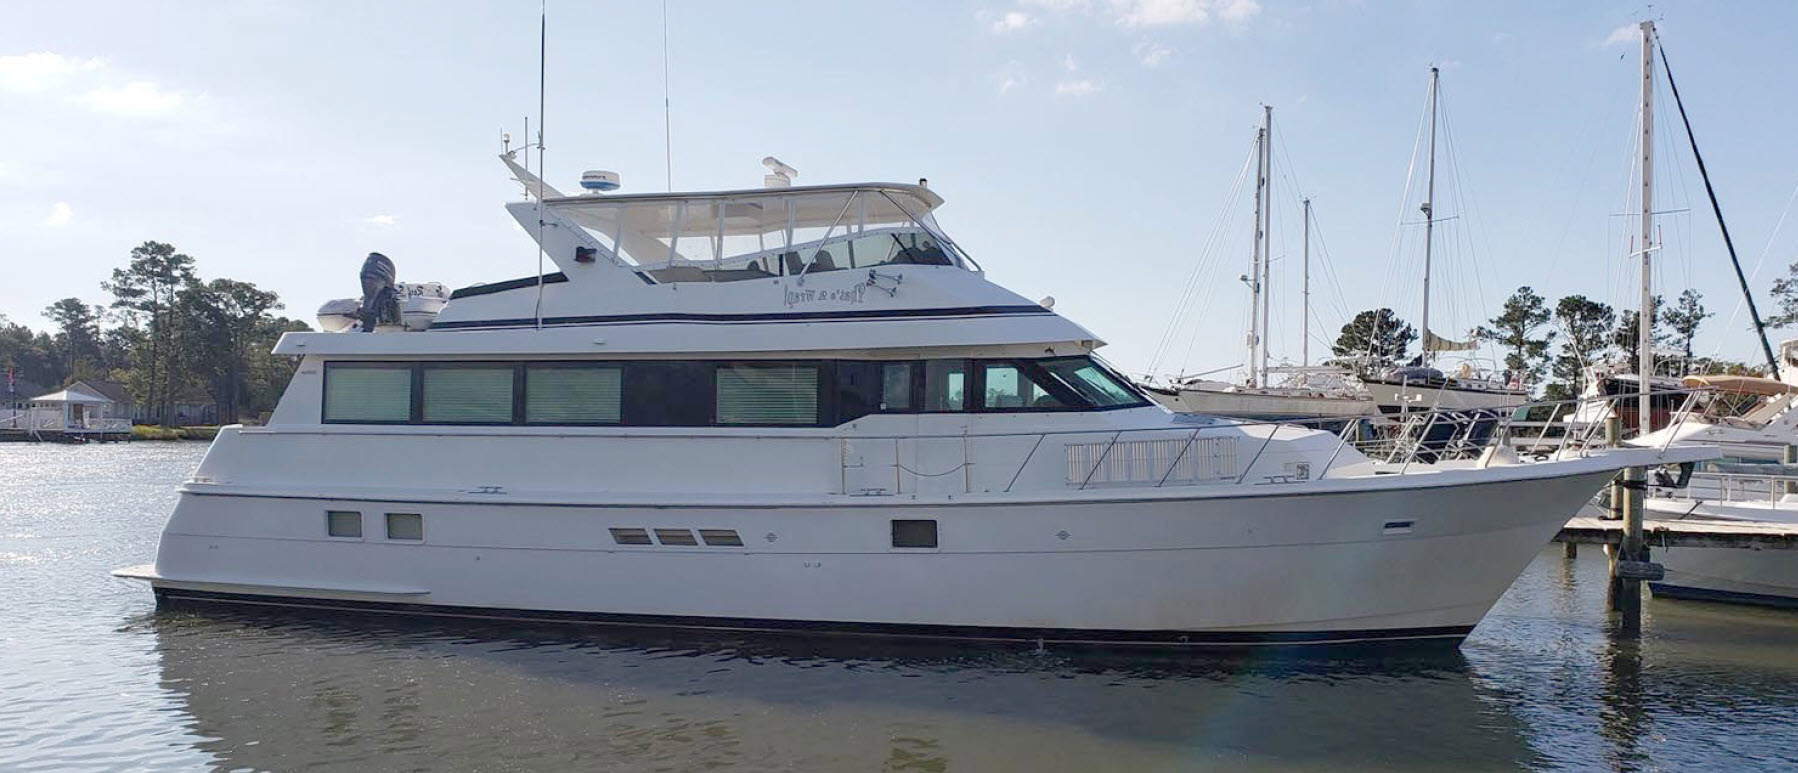 hatteras motor yacht for sale